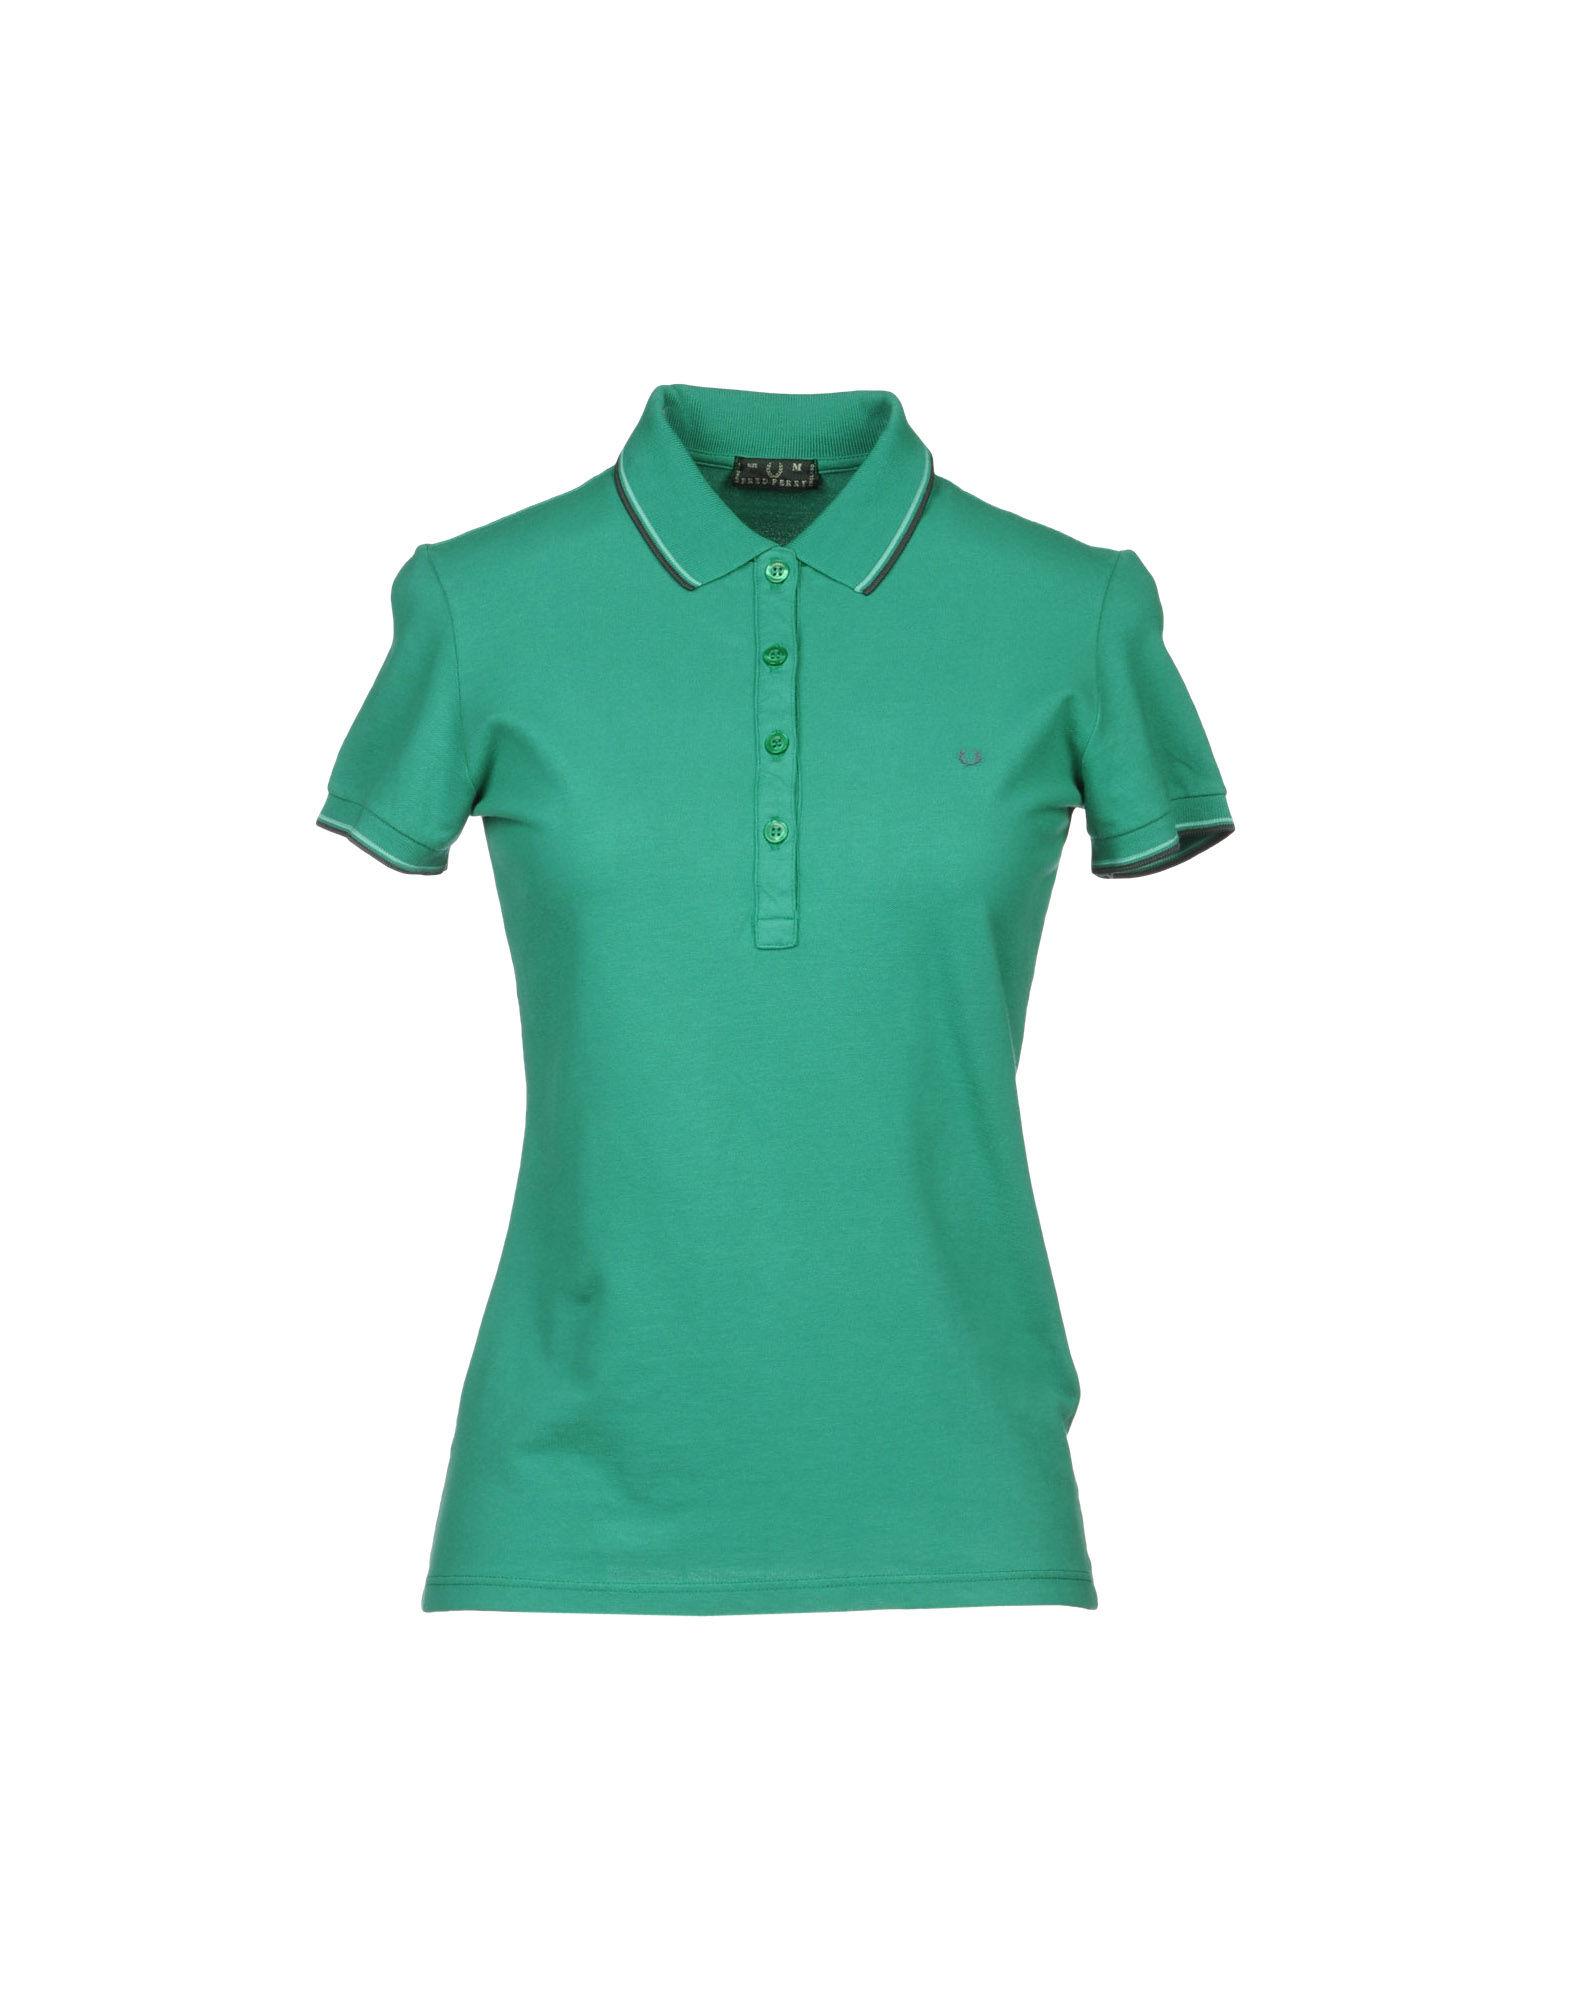 Foto fred perry polos
 foto 93559